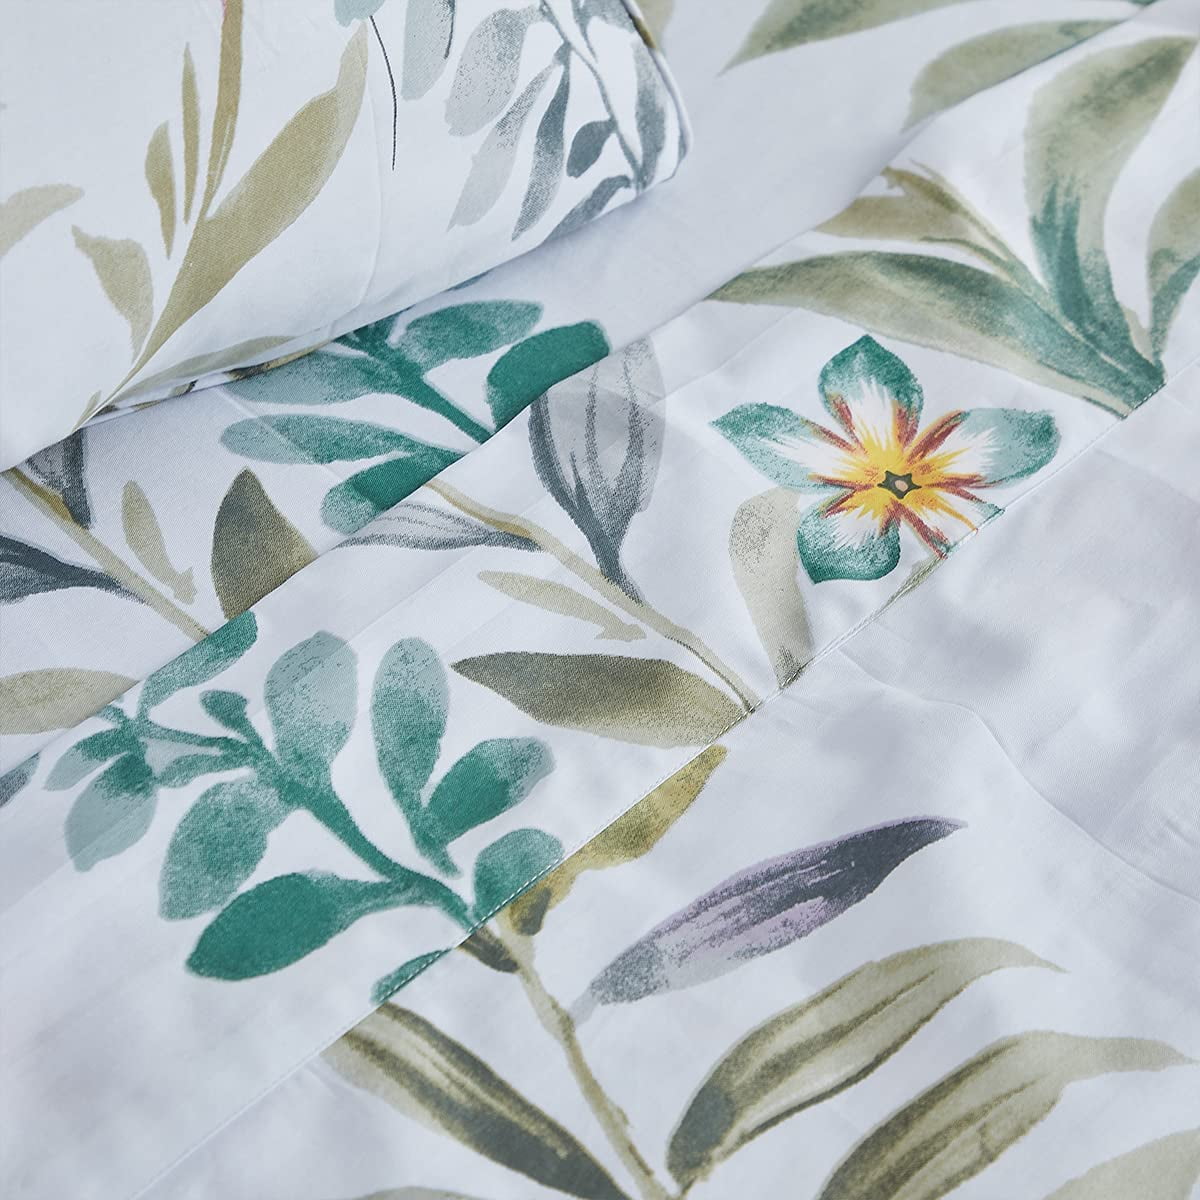 FADFAY Sheets Set King Floral Sheets 100% Cotton Elegant Farmhouse Bedding  Mint Green Leaves and White Flower Printed Bed Sheet Soft Botanical Lily Pa 